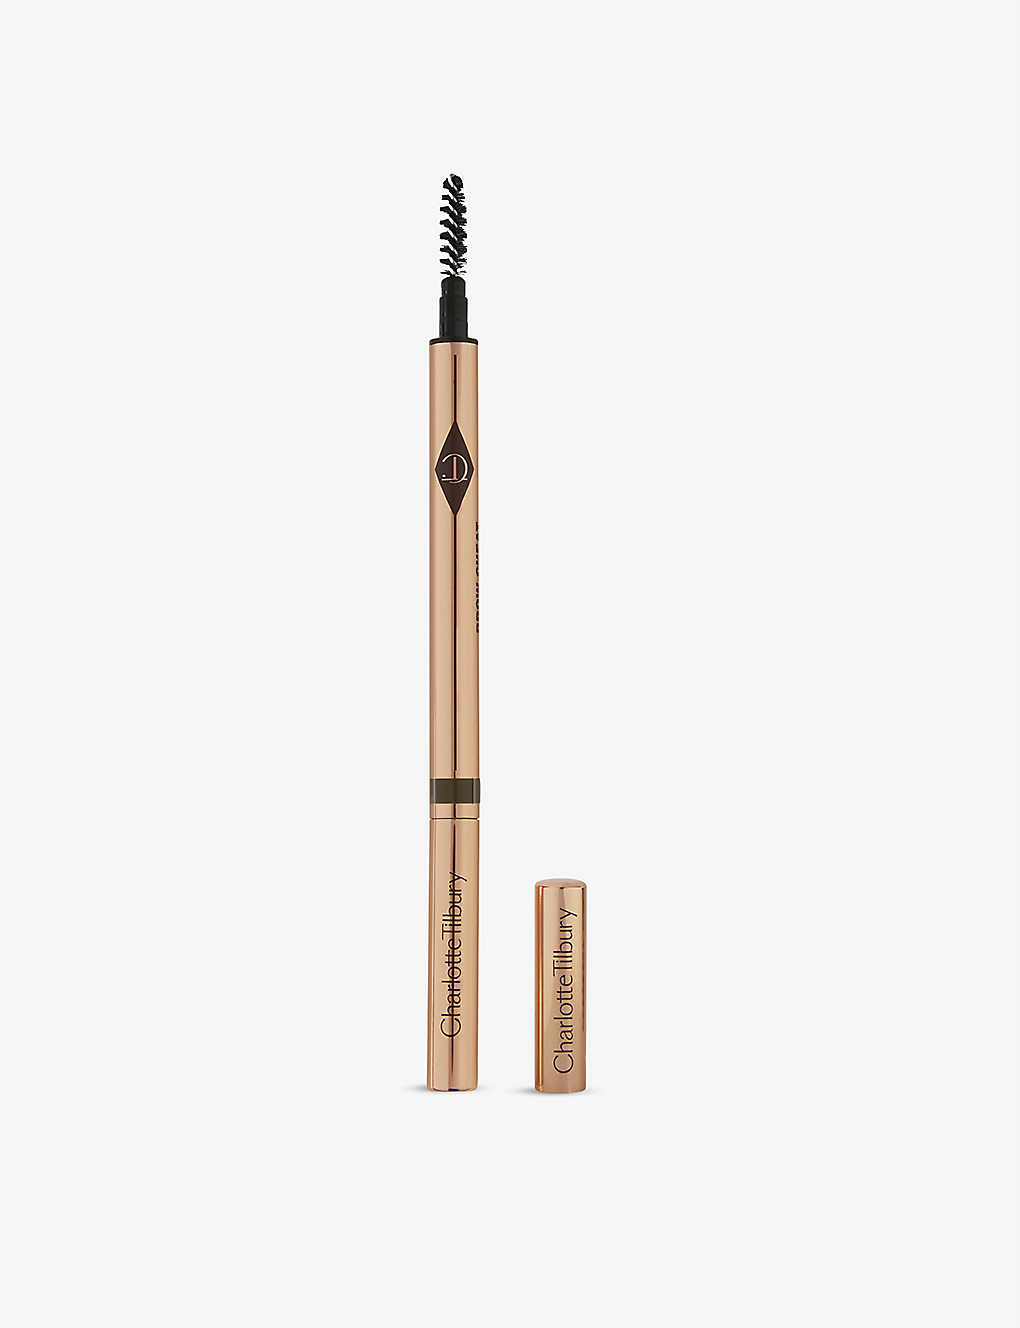 Charlotte Tilbury Brow Cheat Refillable Eyebrow Pencil 0.1g In Natural Brown